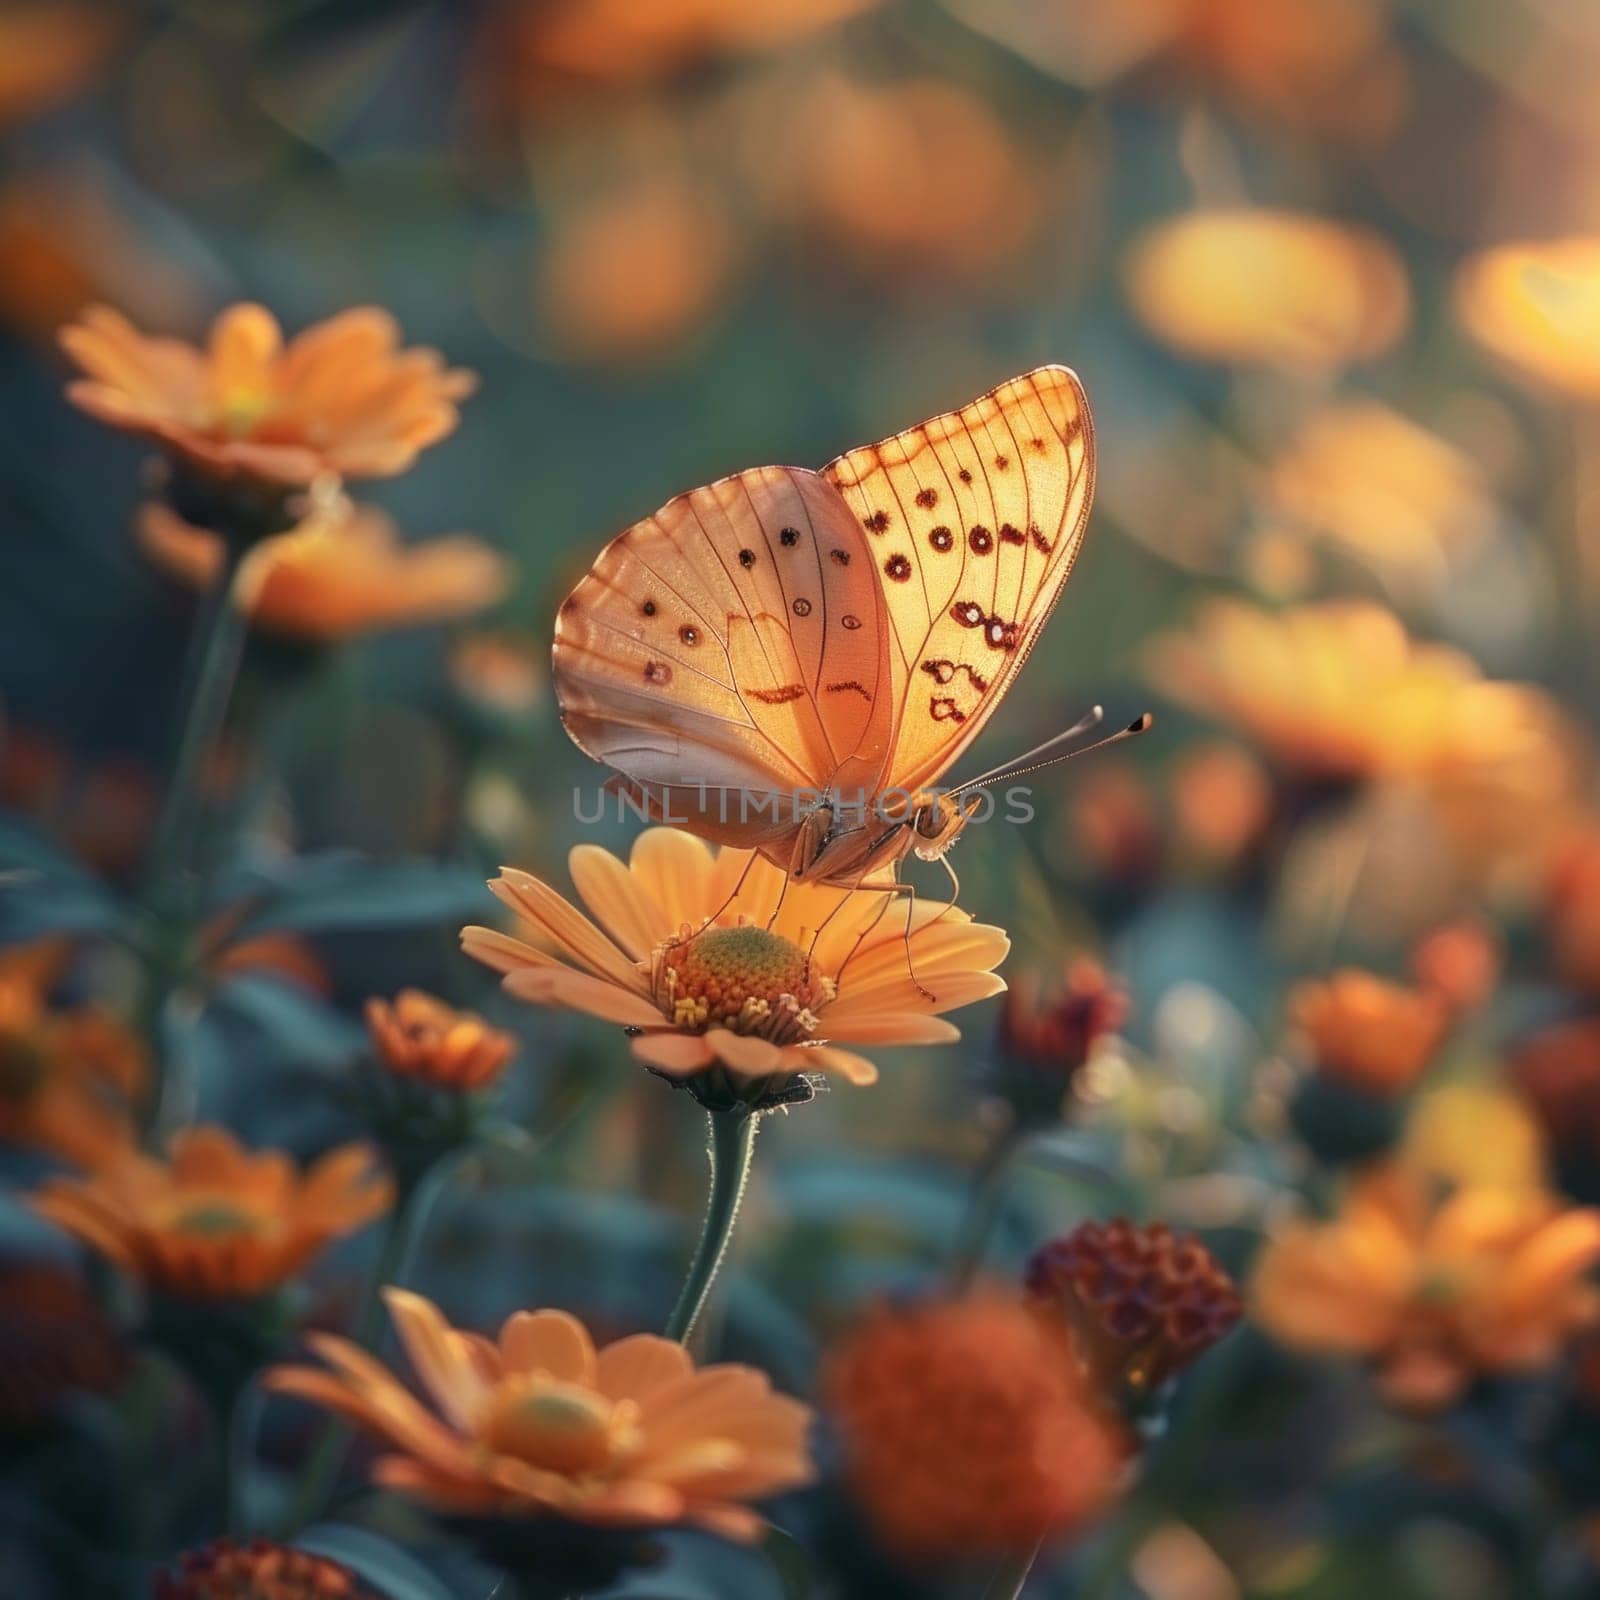 A colorful butterfly gently perched on a vibrant yellow flower, creating a serene and captivating moment in nature.